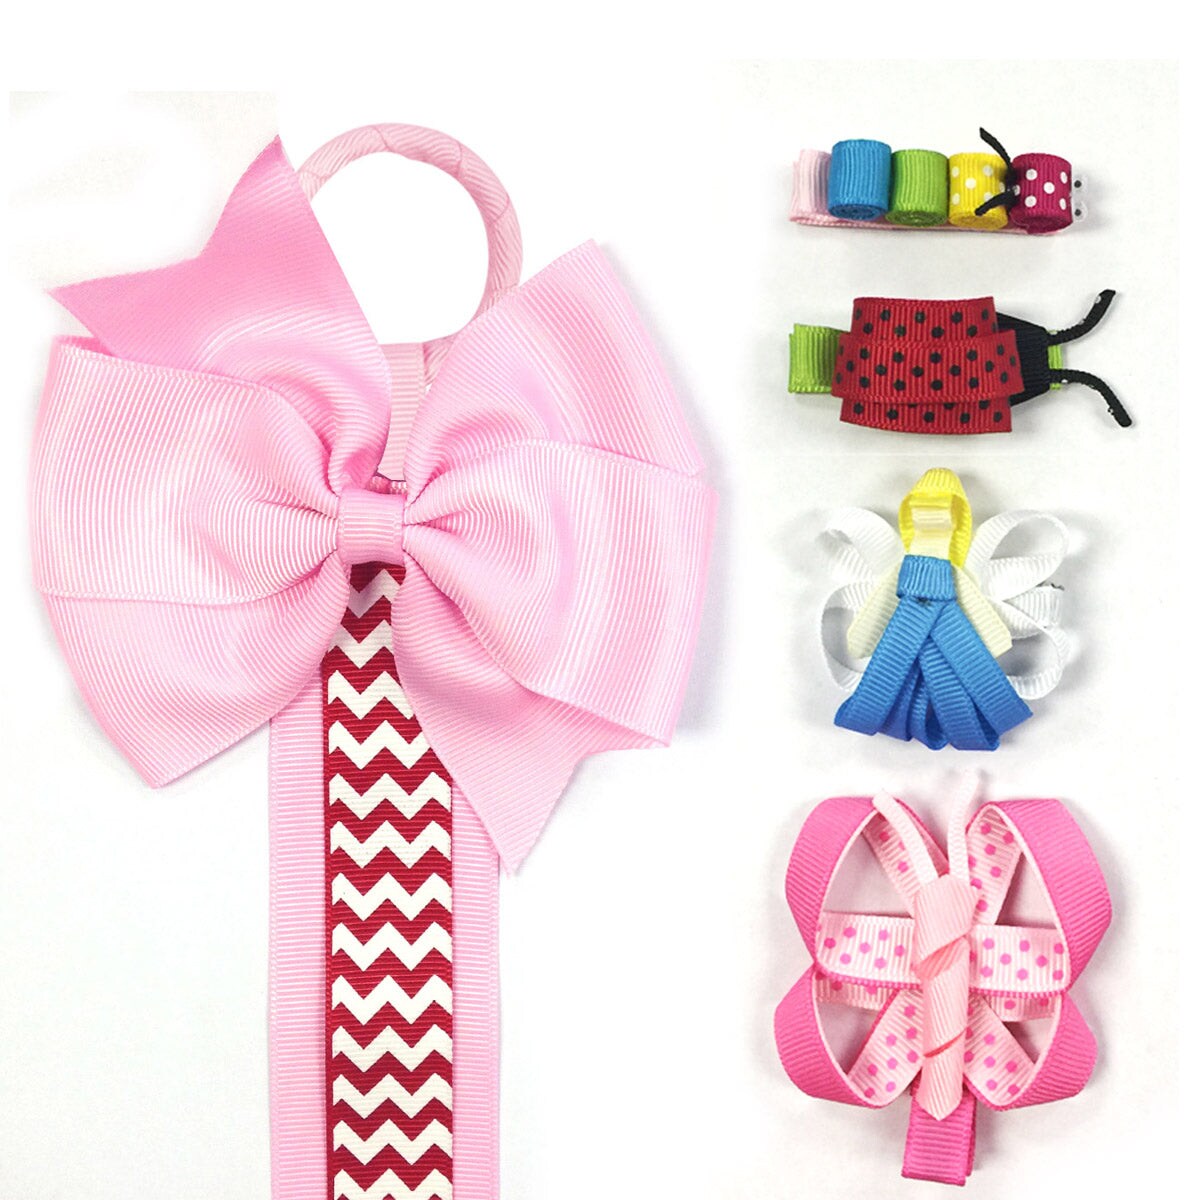 Wrapables Angel, Butterfly, Ladybug, Caterpillar Ribbon Sculpture Hair Clips with Chevron Hair Clip / Hair Bow Holder, Pink